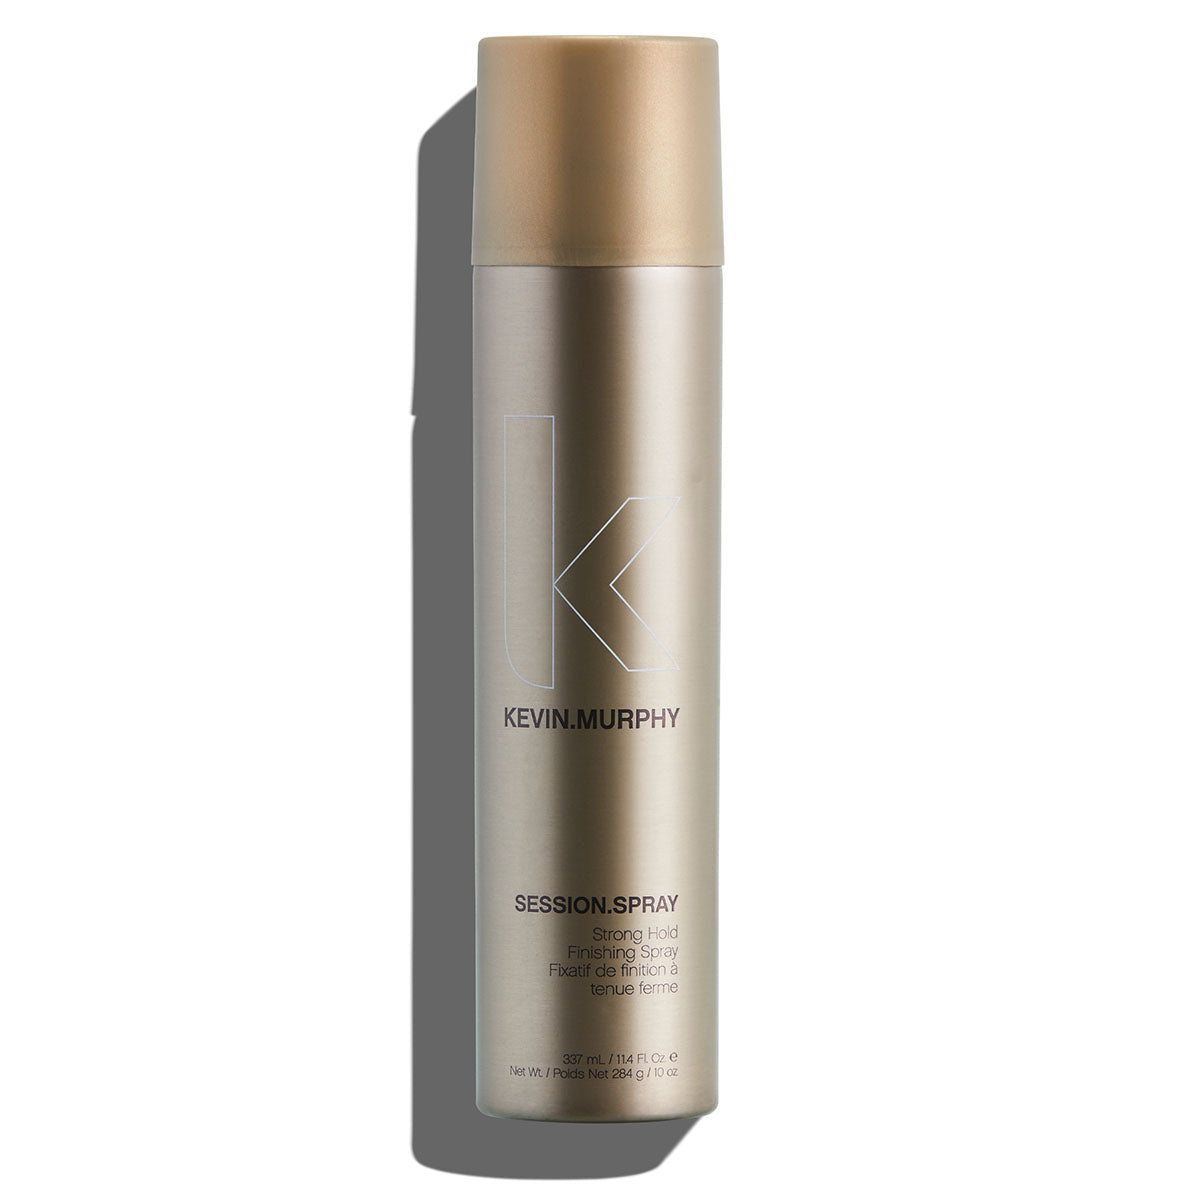 KEVIN.MURPHY Session Spray 337ml